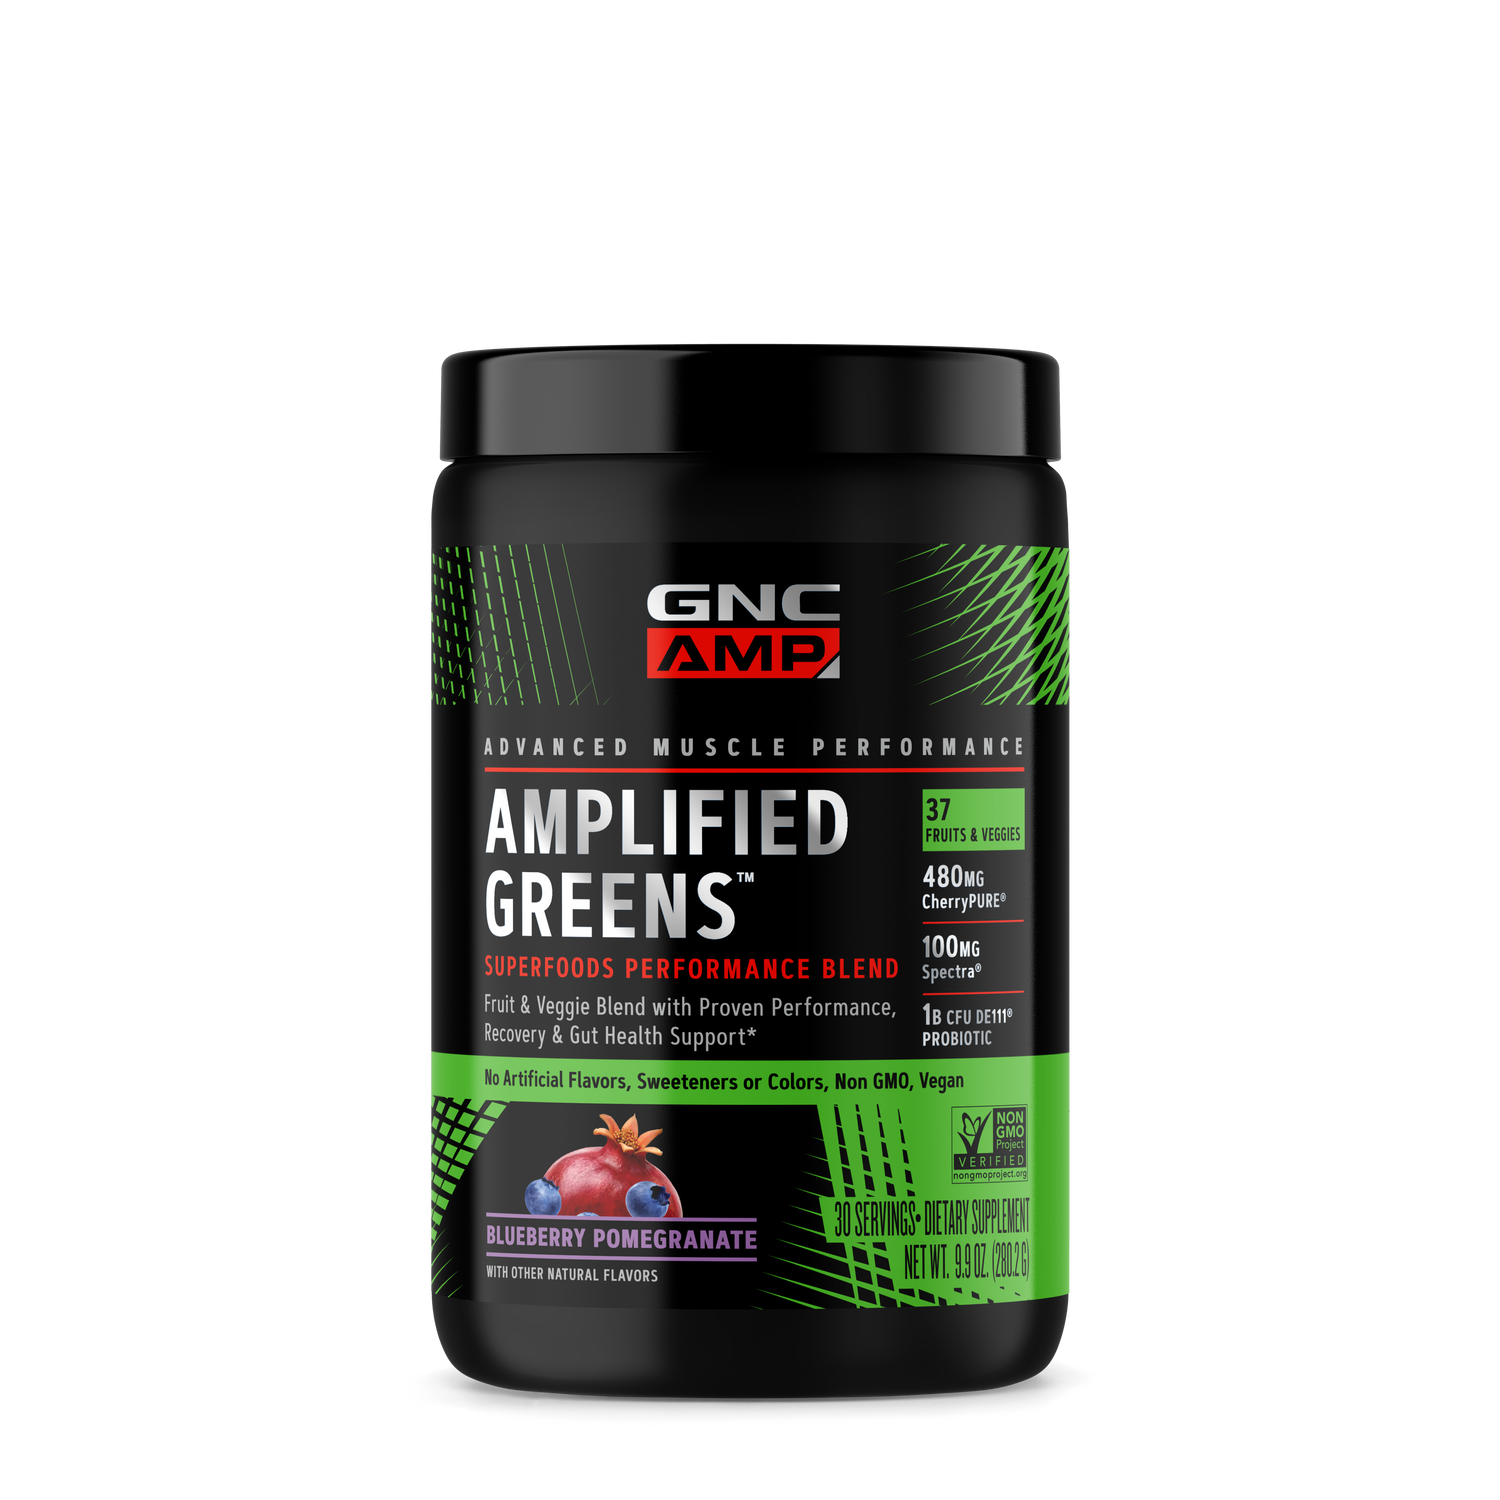 GNC AMP Amplified Greens Superfoods Performance Blend Healthy - Blueberry Pomegranate Healthy - 9.9 Oz. (30 Servings)